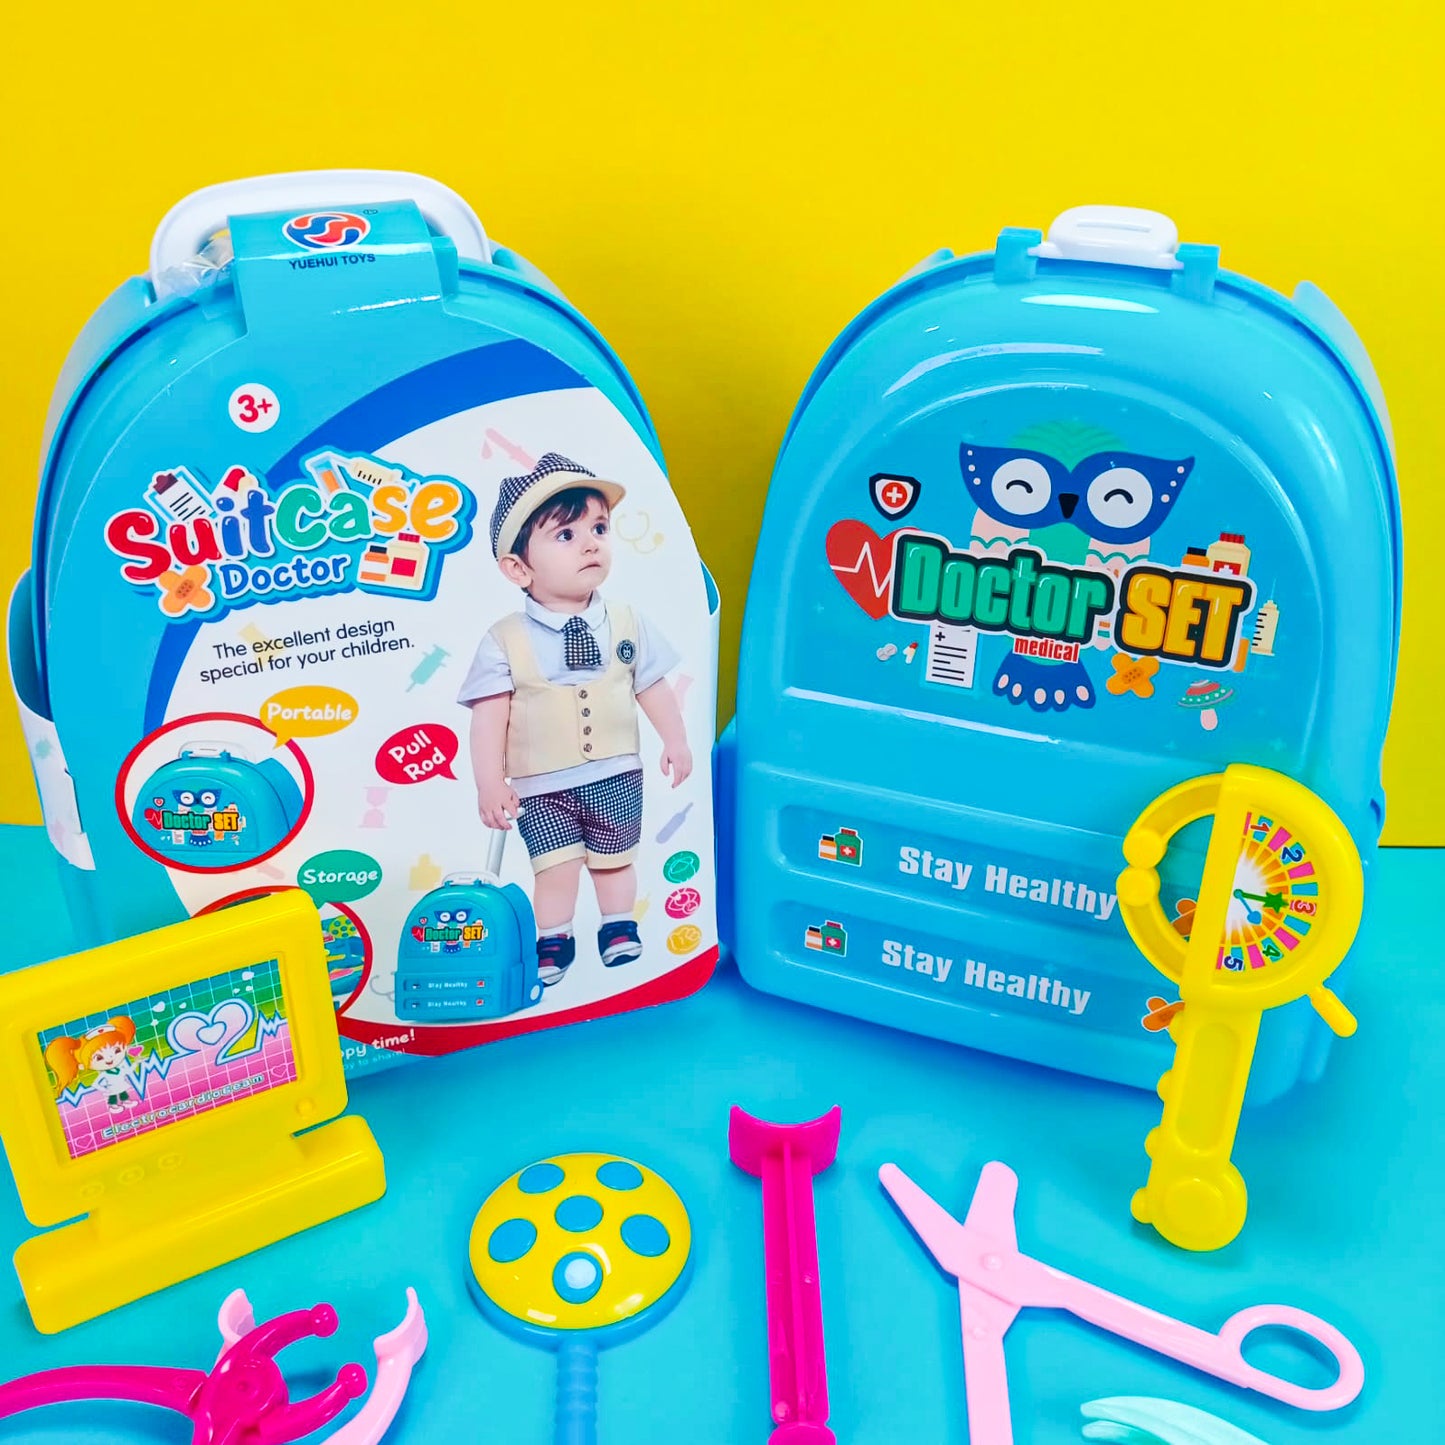 Dessert Suitcases For kids Playset with Accessories, Adorable Travel Suitcase